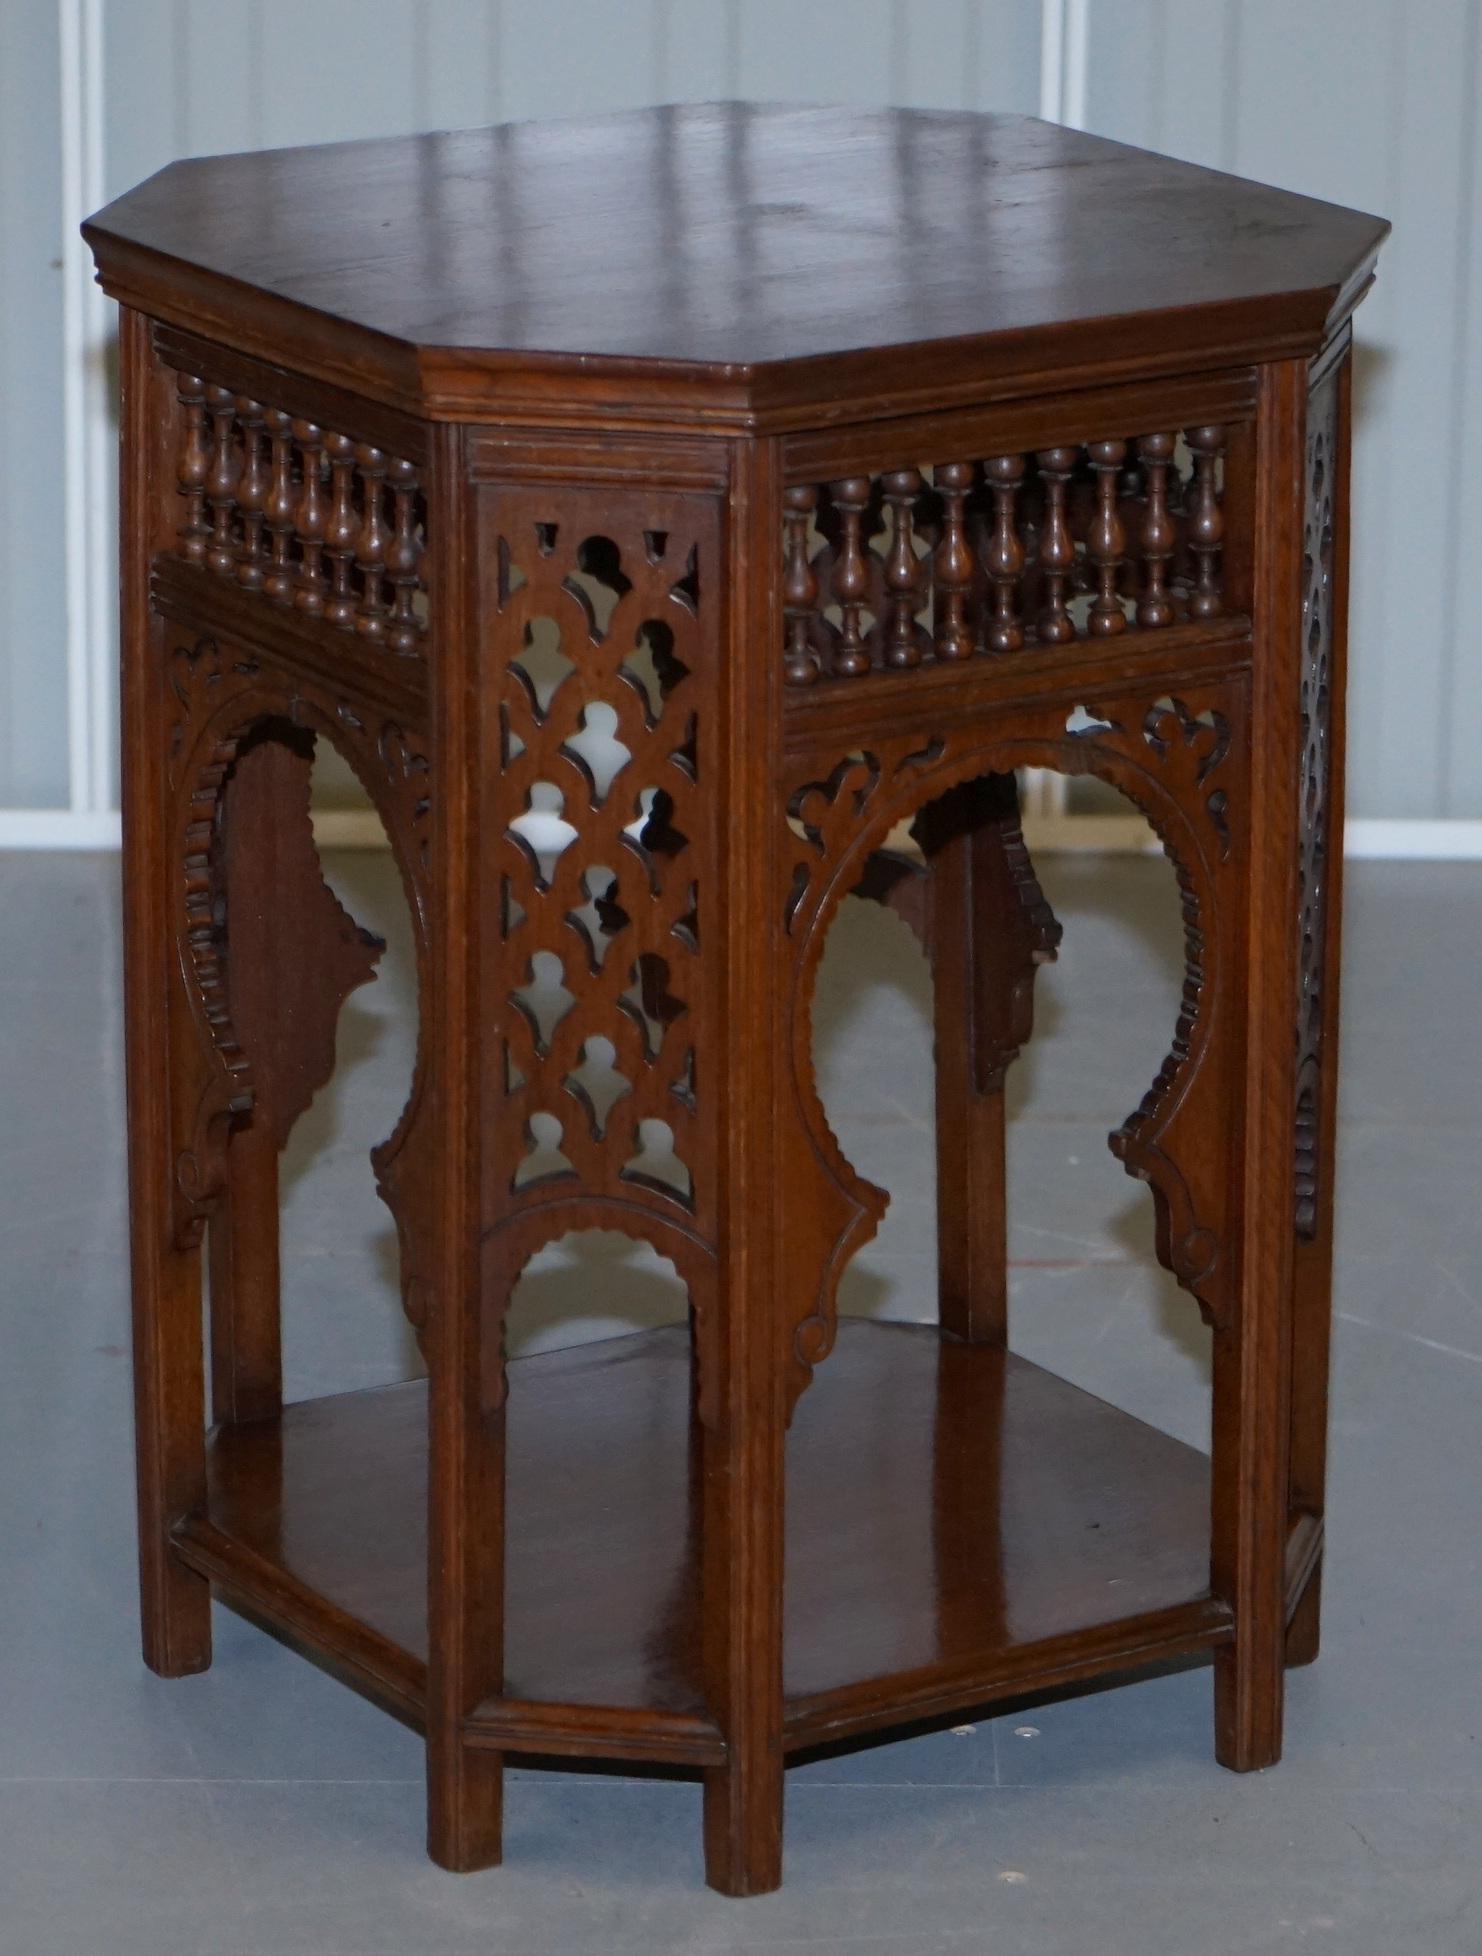 Wimbledon-Furniture

Wimbledon-Furniture is delighted to offer for sale this lovely 19th century Neo Moorish walnut side table retailed through Libertys London

Please note the delivery fee listed is just a guide, it covers within the M25 only,